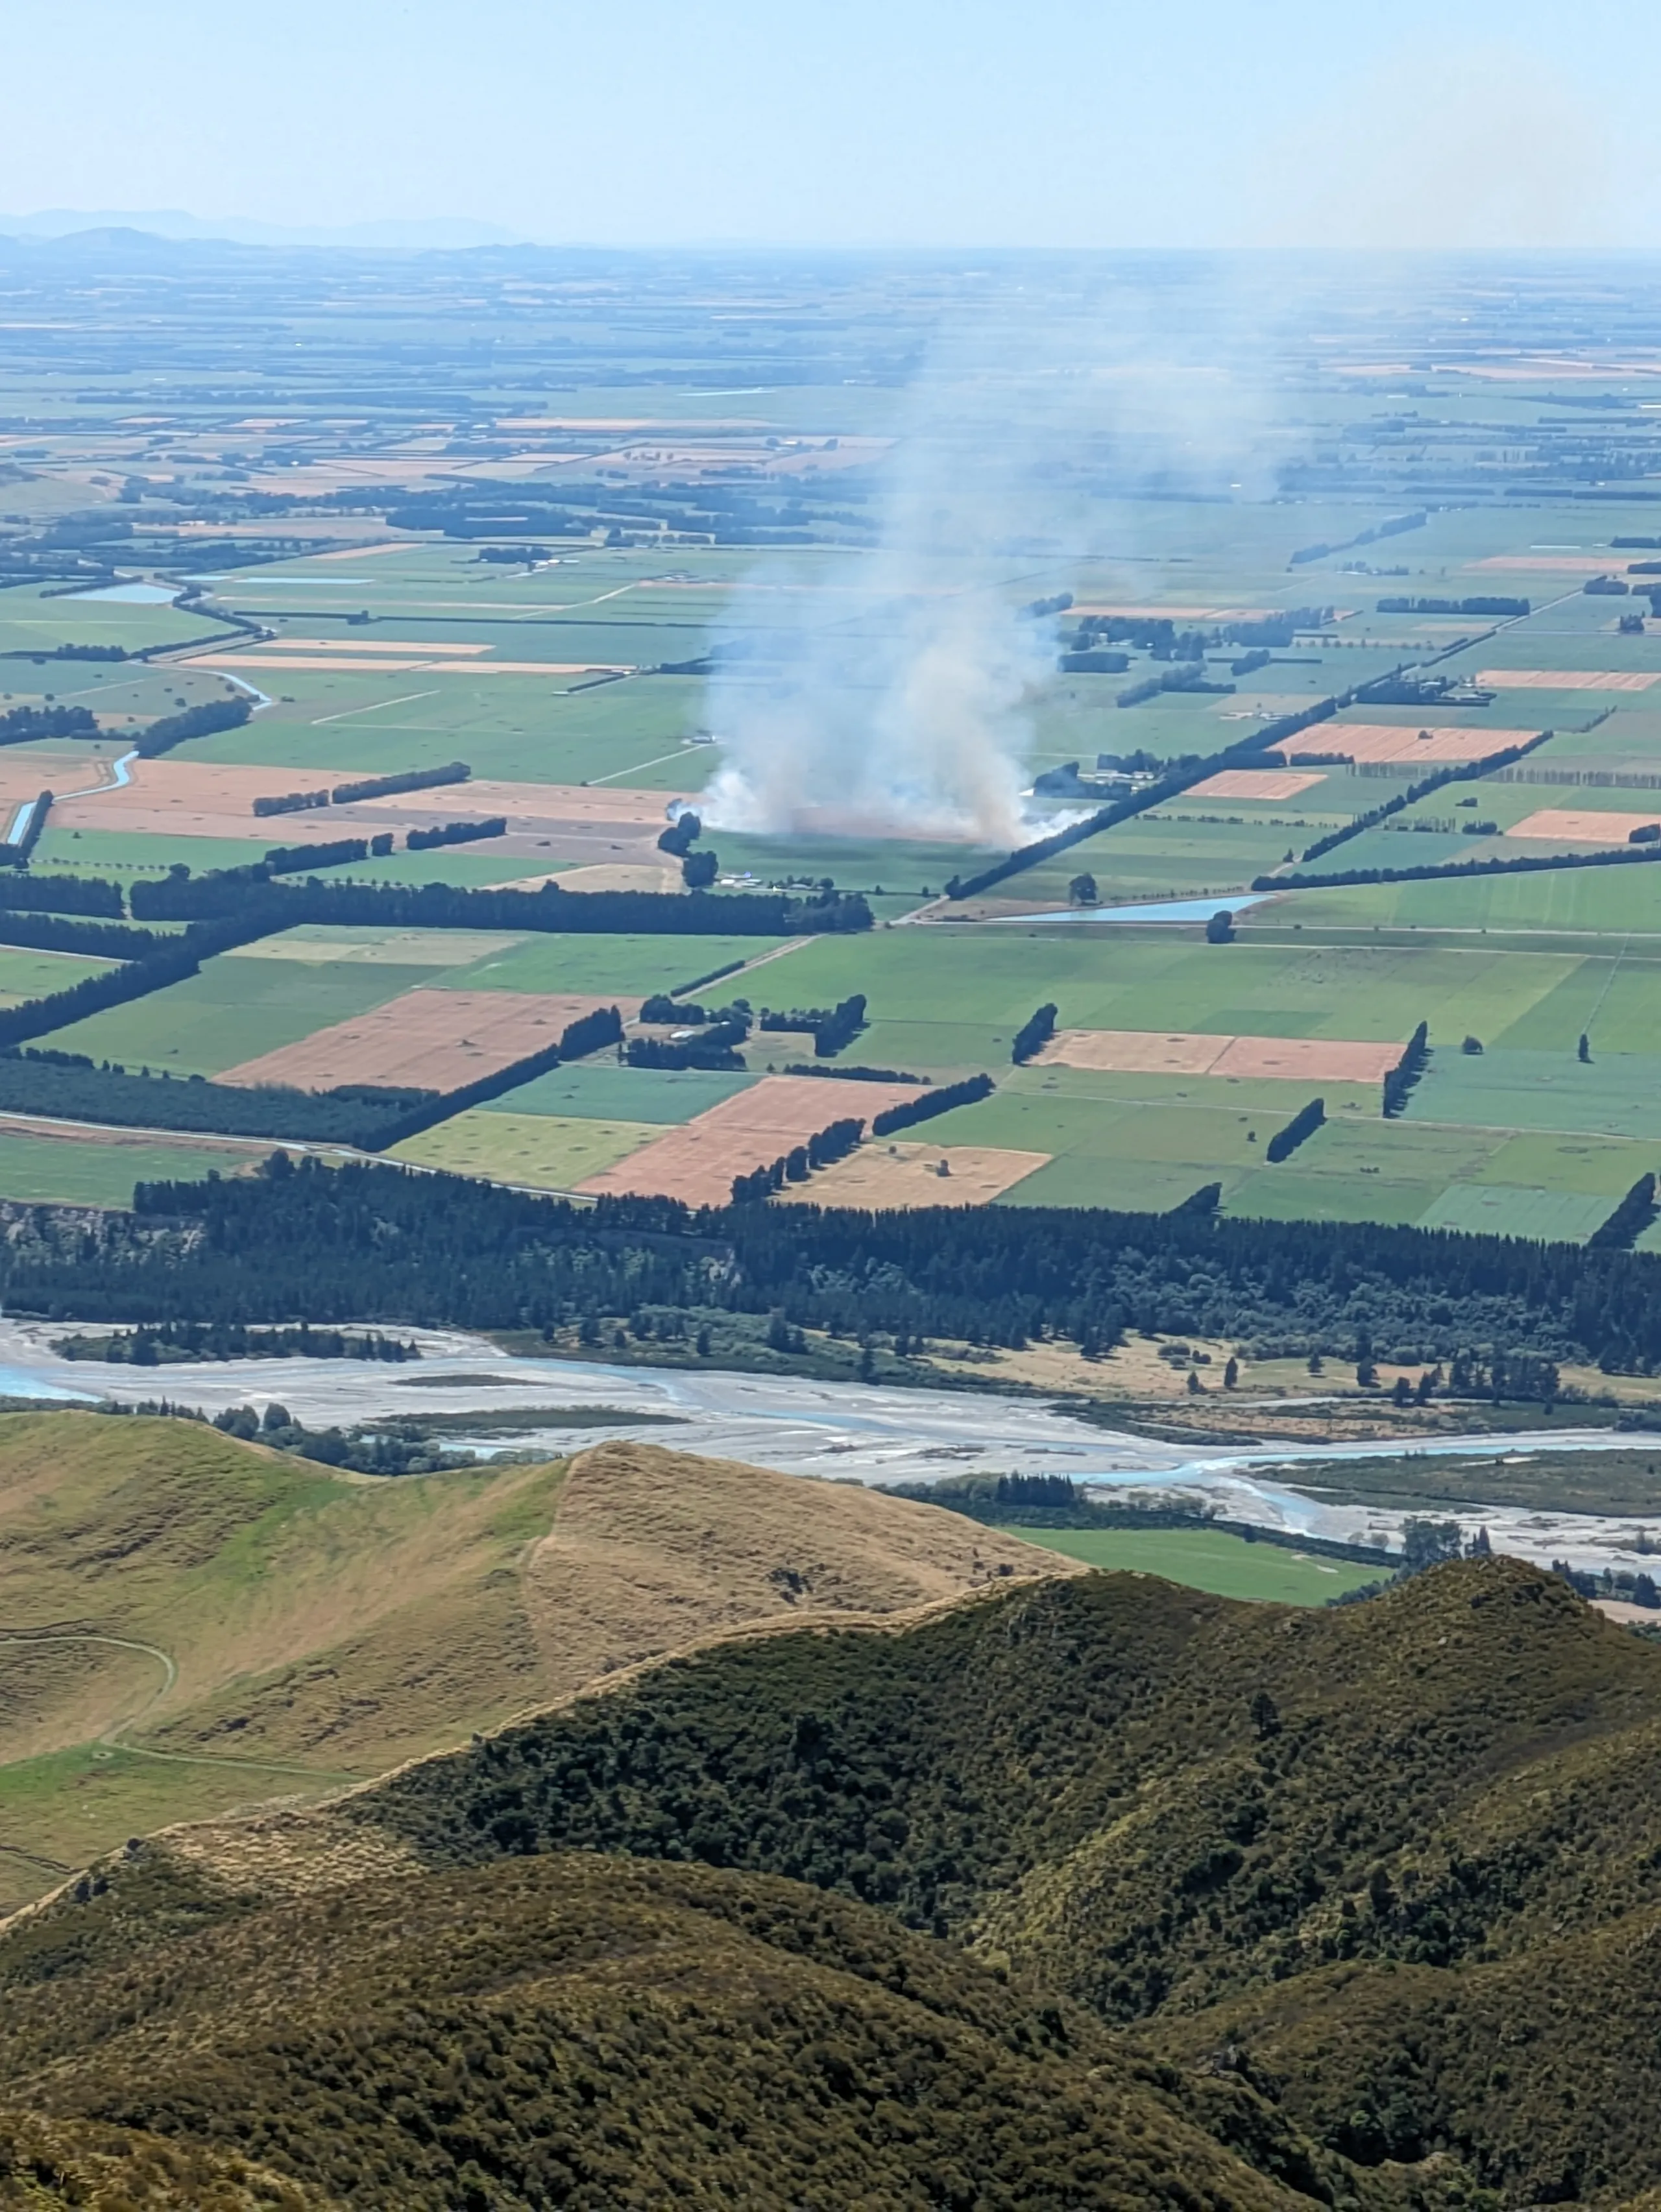 Nearby grass fire which developed (and was extinguished) while we were above the bushline